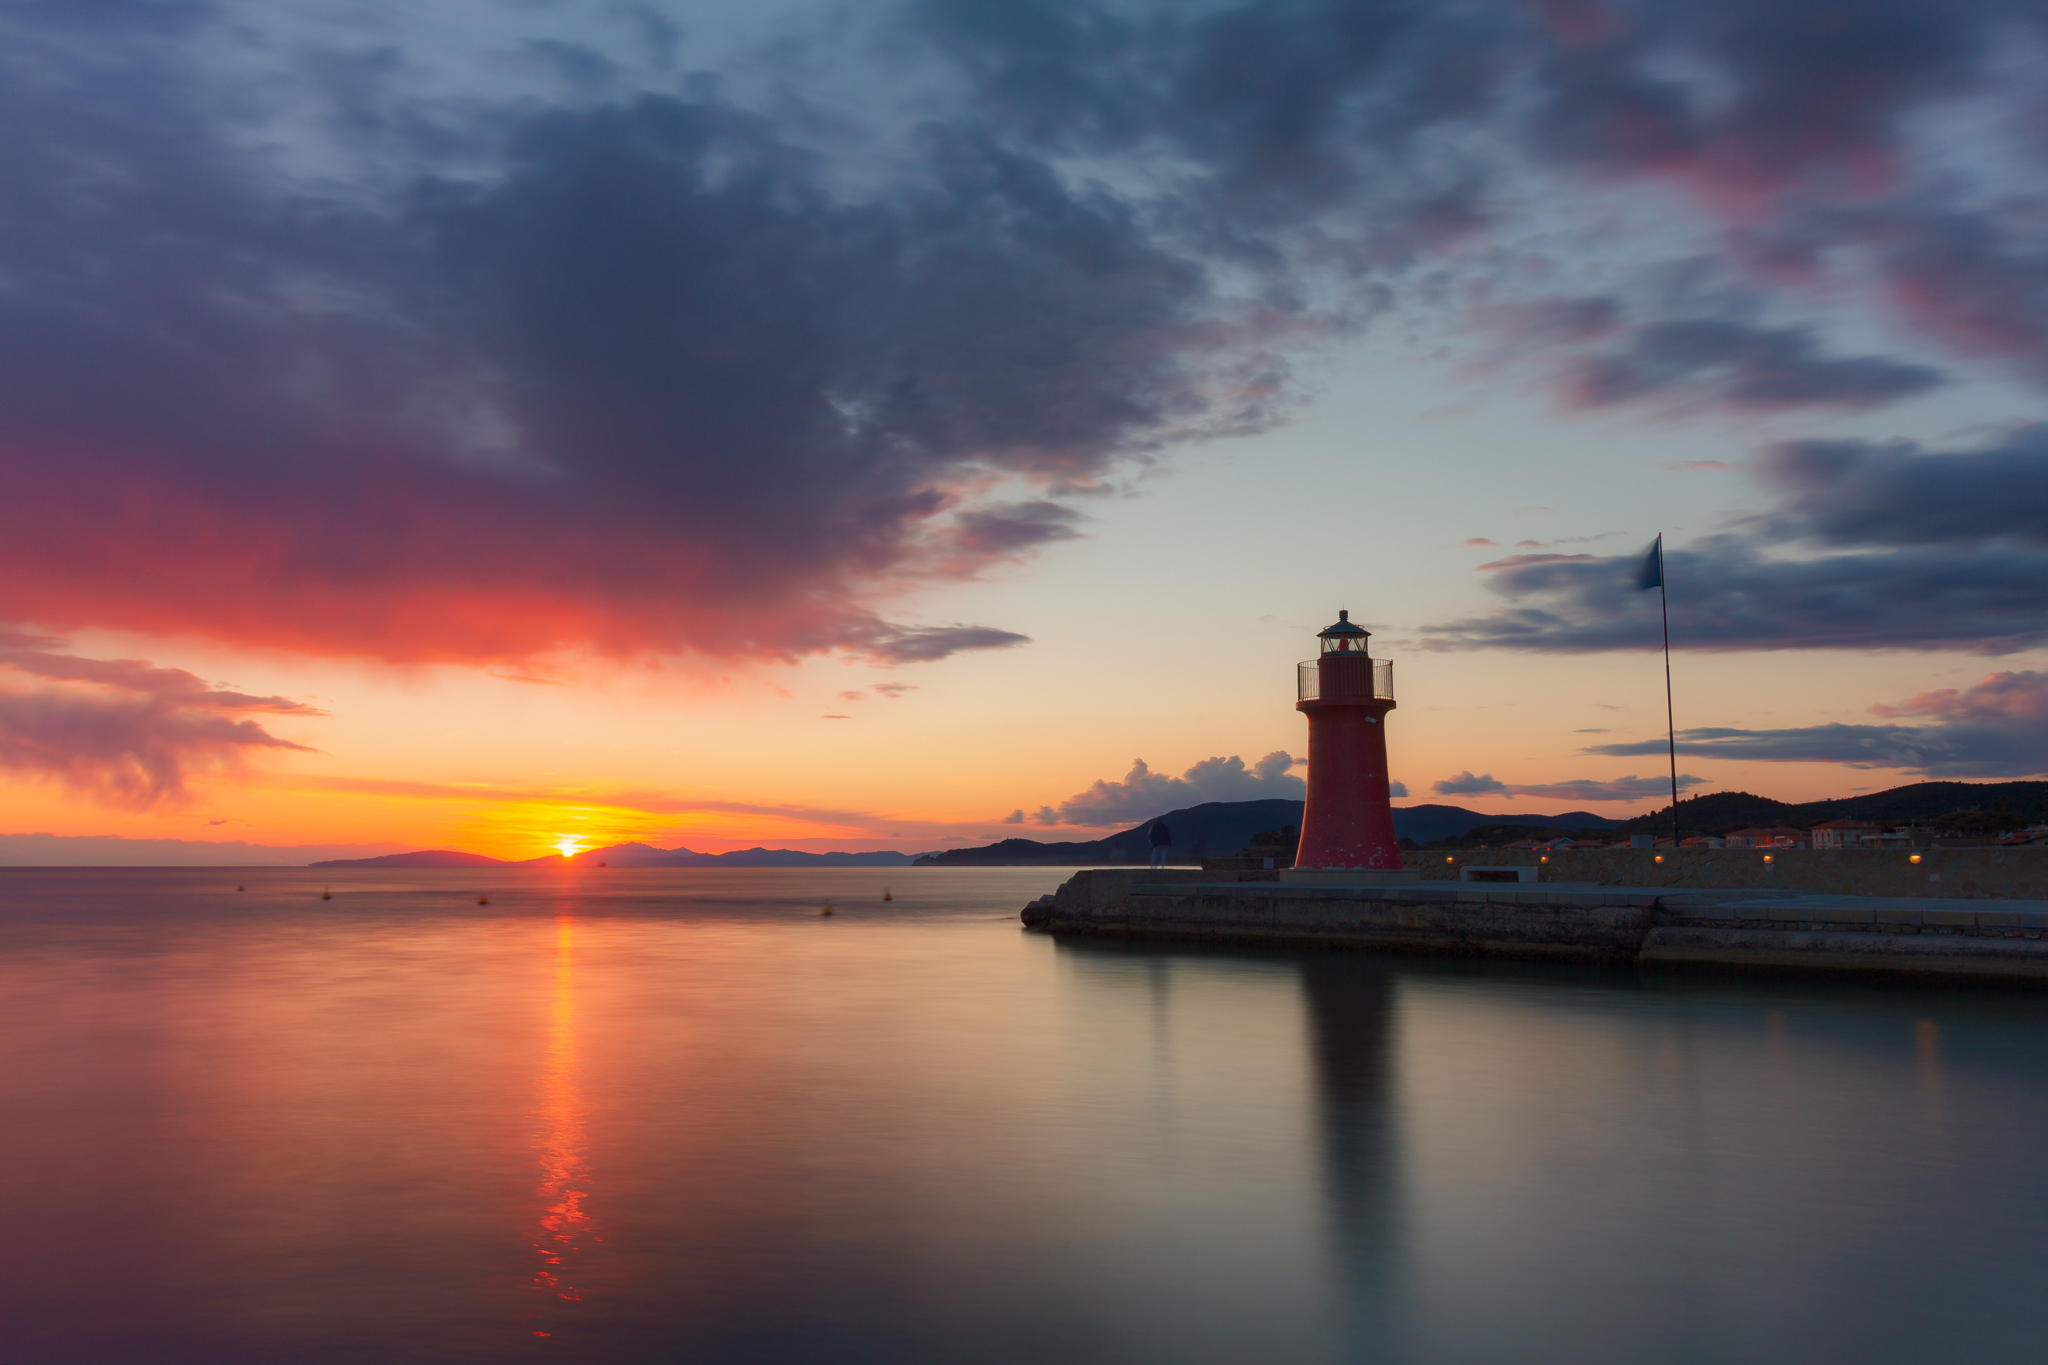 Sunset at the lighthouse ...